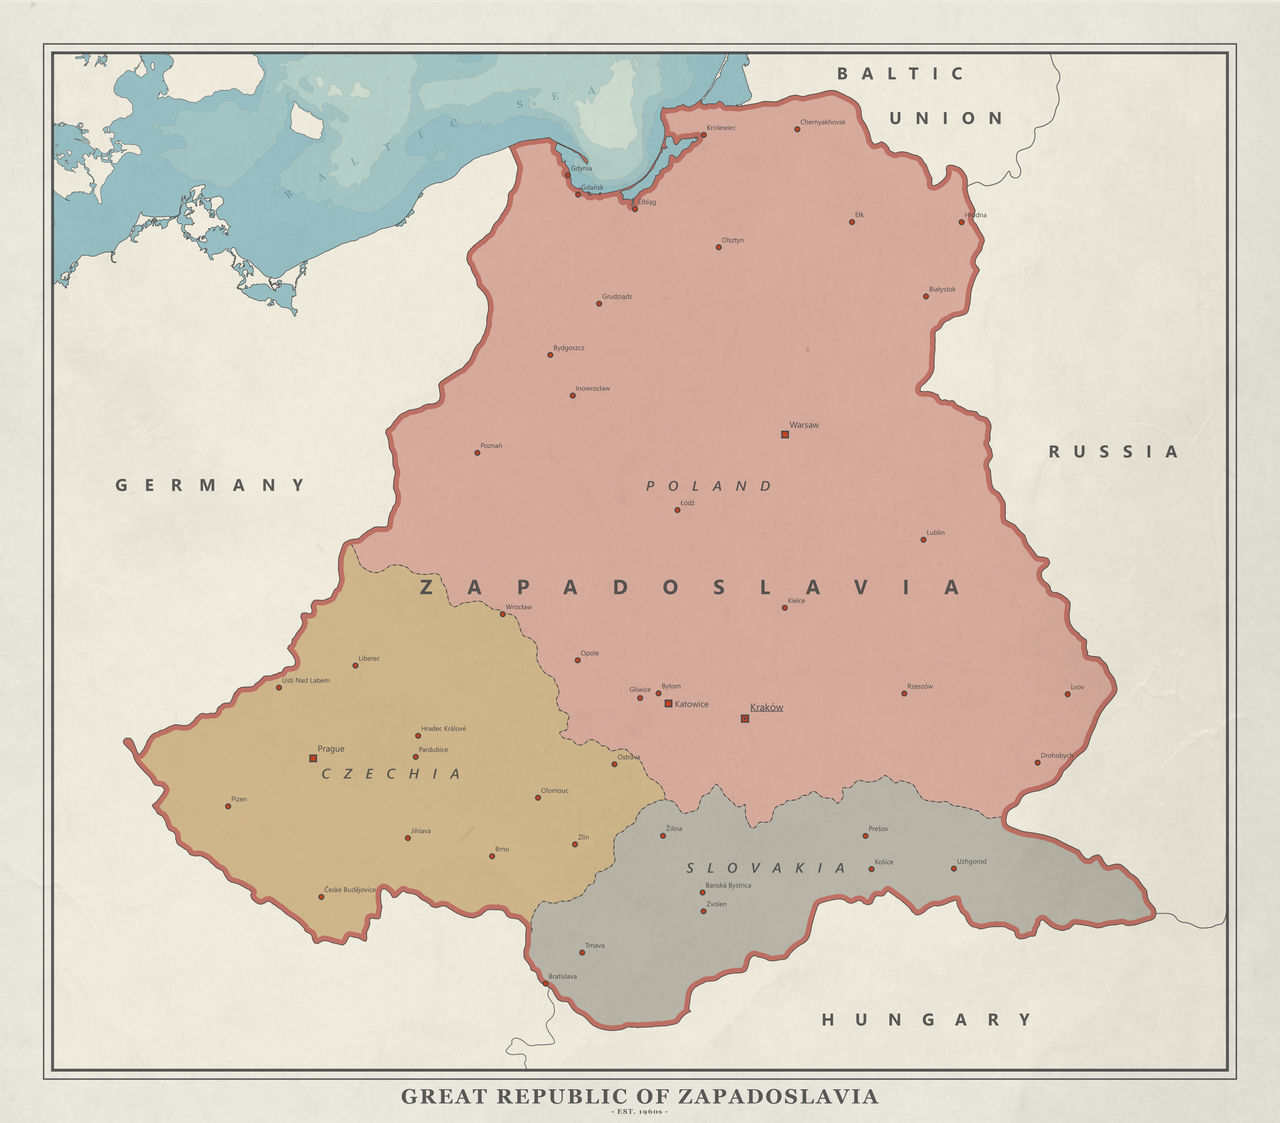 the_great_republic_of_zapadoslavia_from_twr_by_cattette_ddf2yly-fullview.jpg